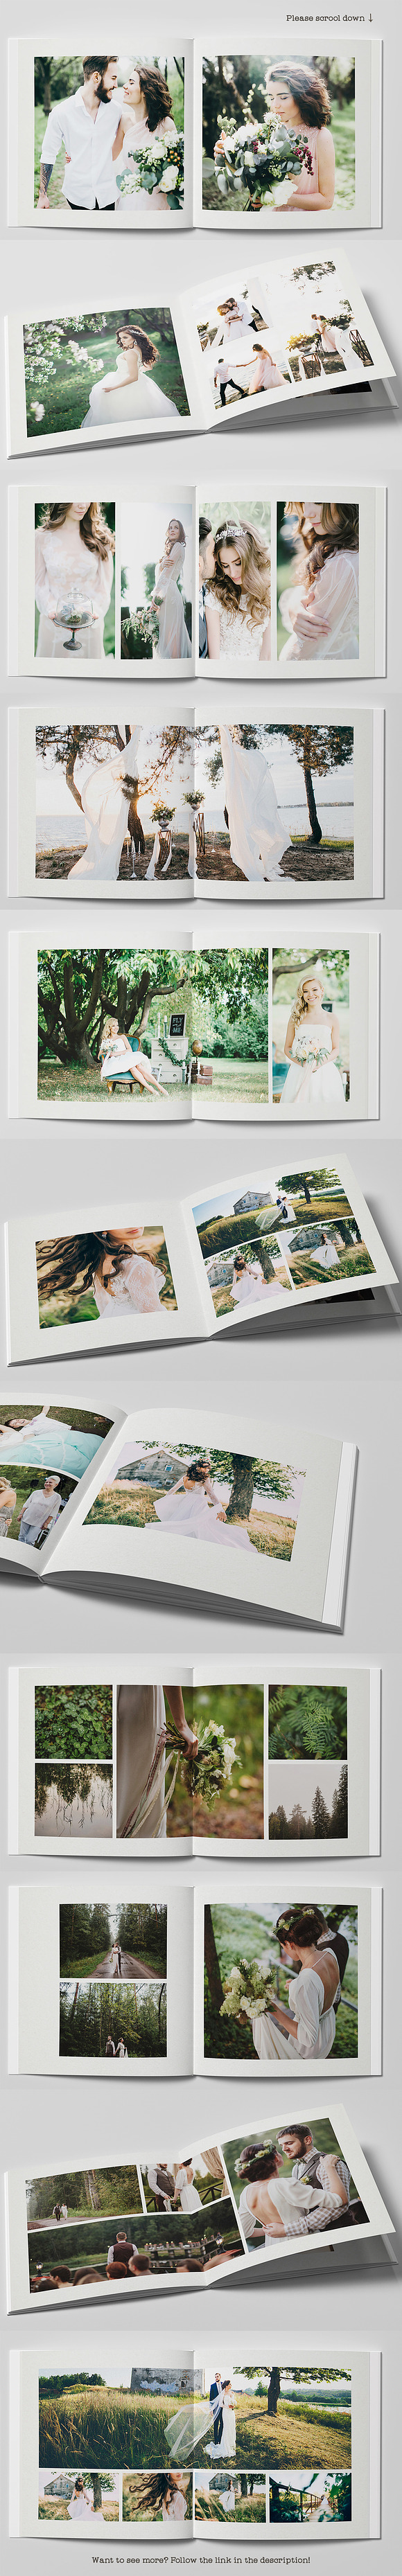 Wedding Album Photoshop Templates in Templates - product preview 1